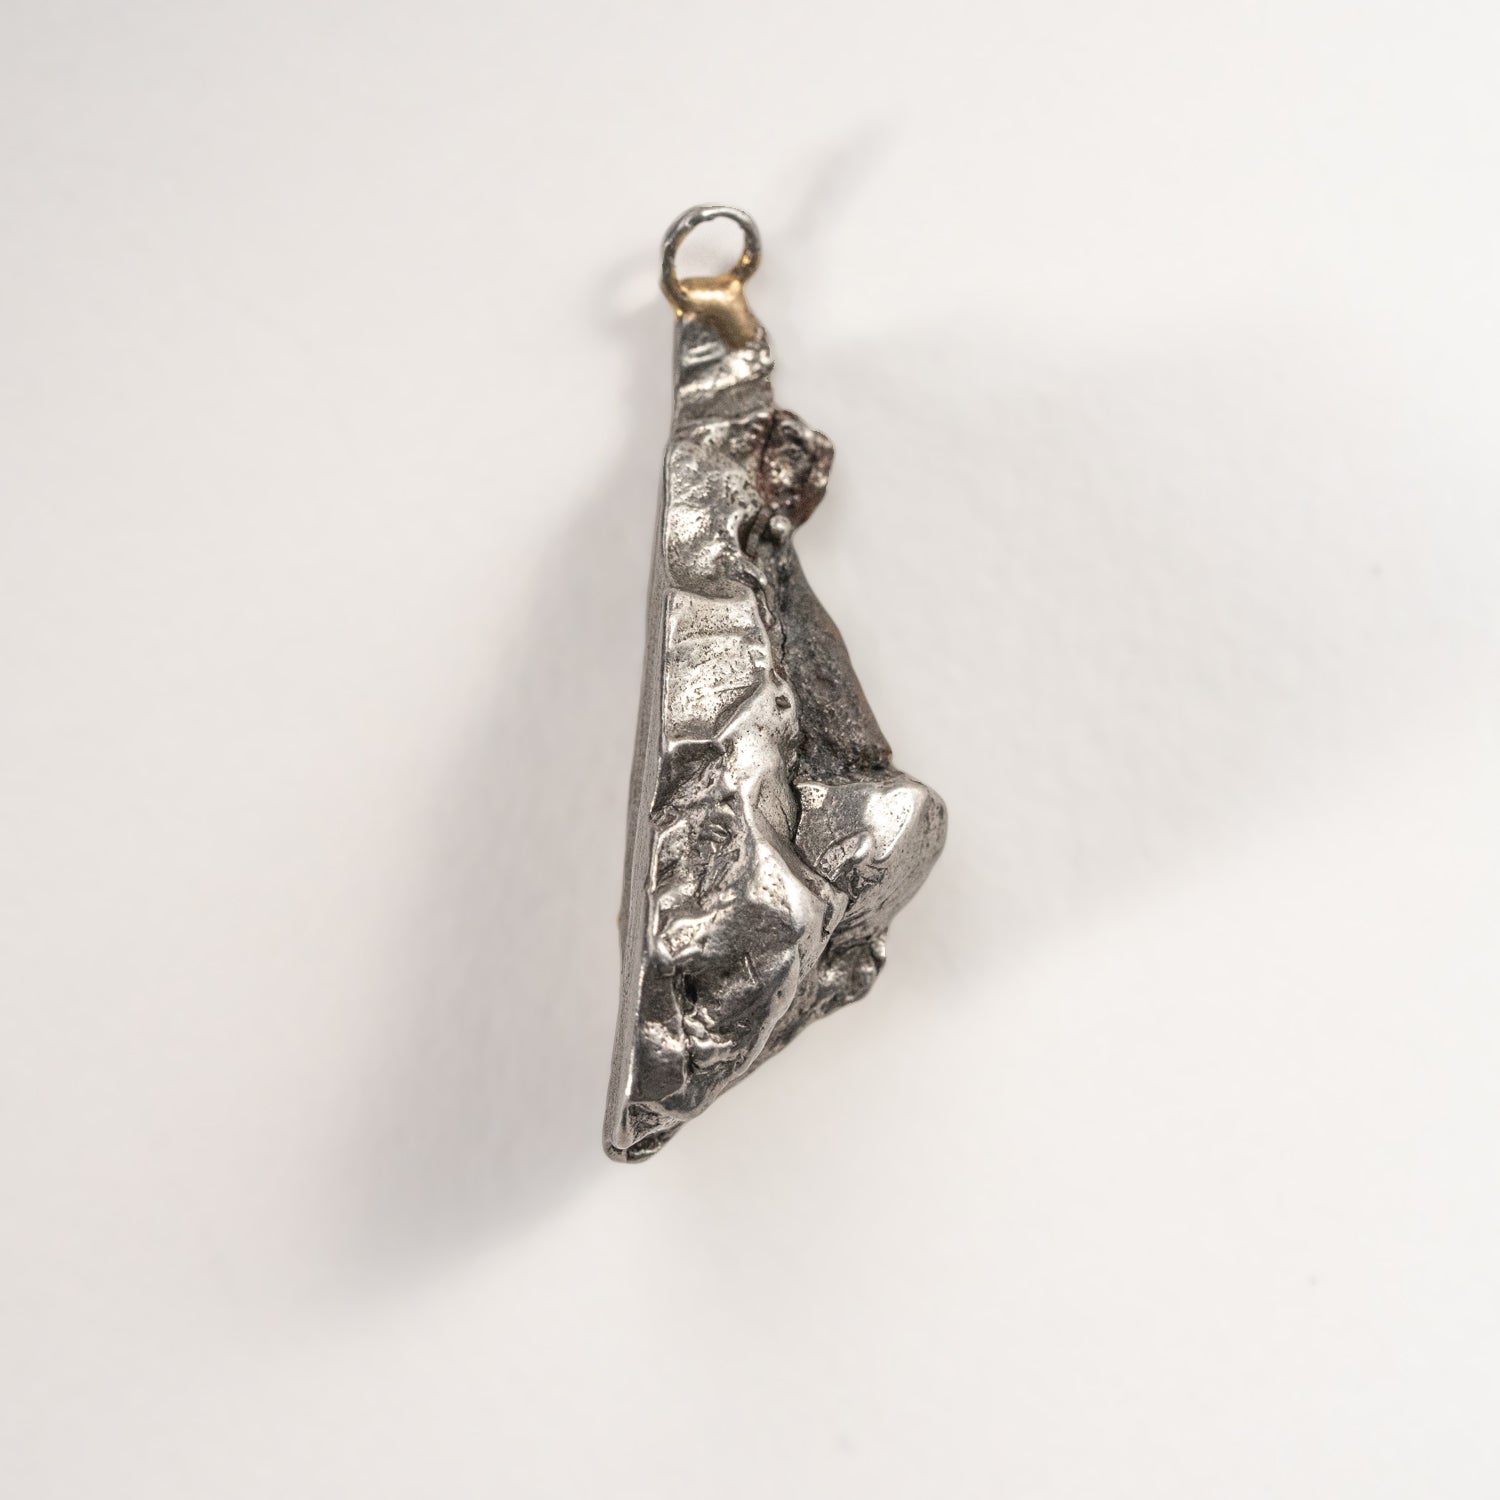 Genuine Sikhote Alin Meteorite Nugget pendant with Sterling Silver Chain